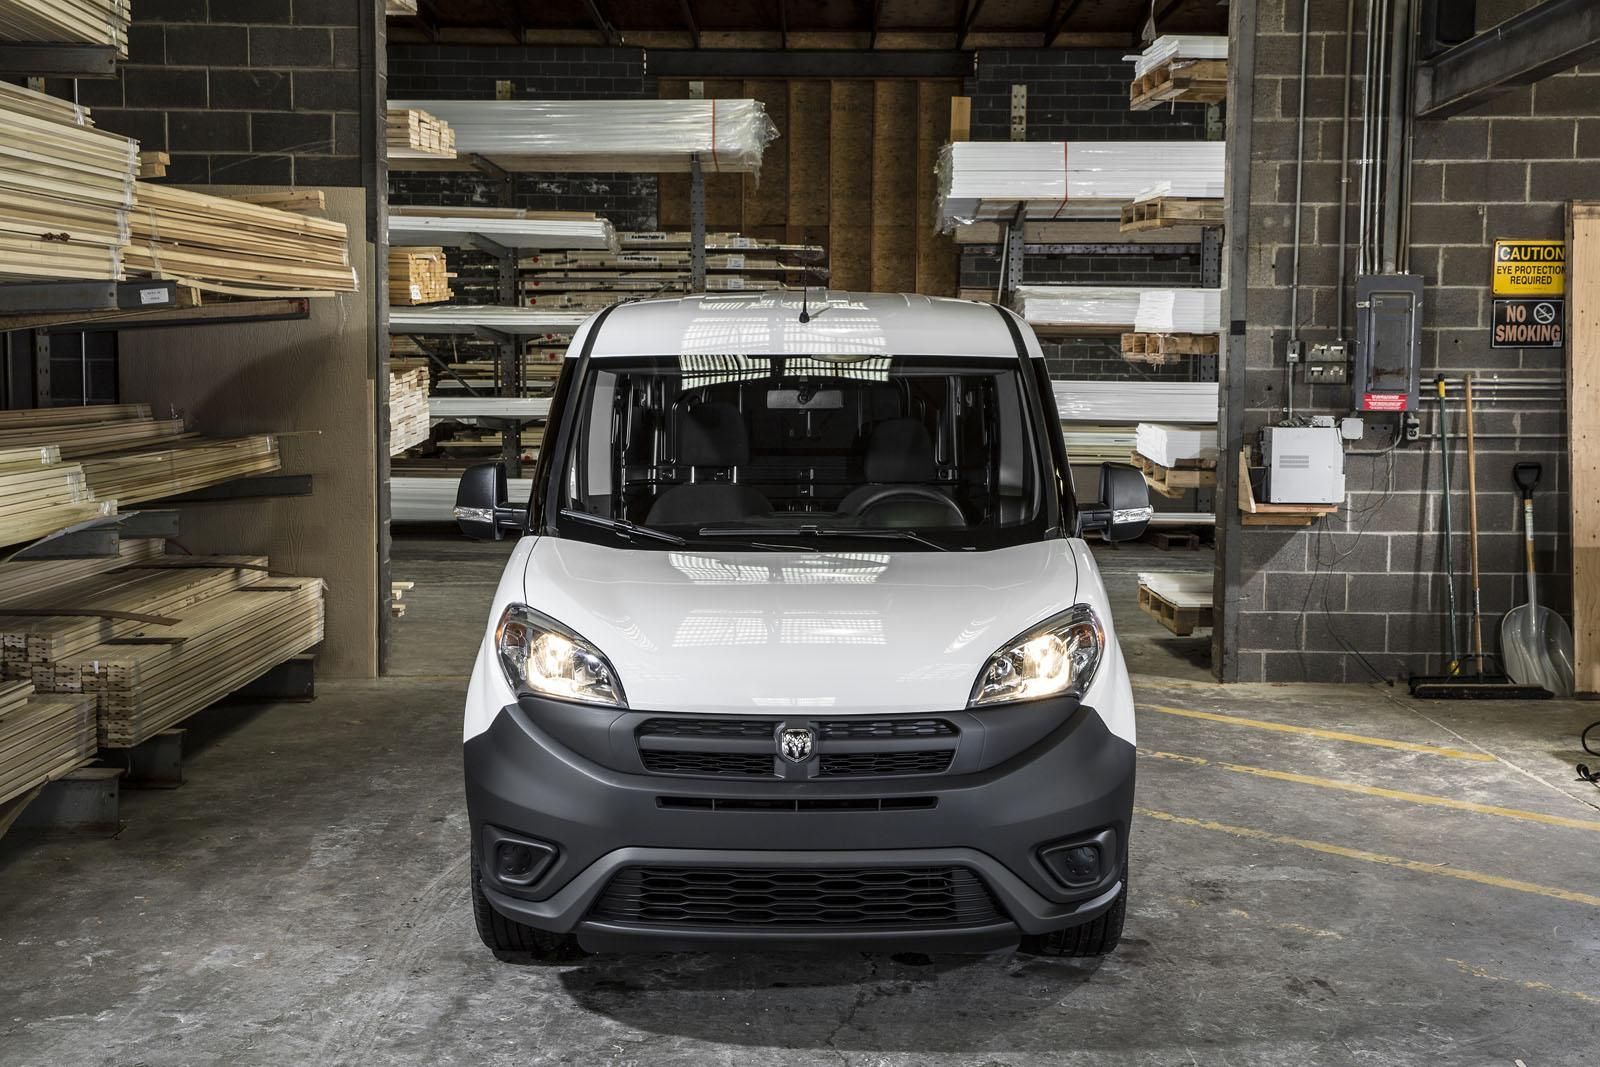 2015 RAM PROMASTER CTY RESM GALERS